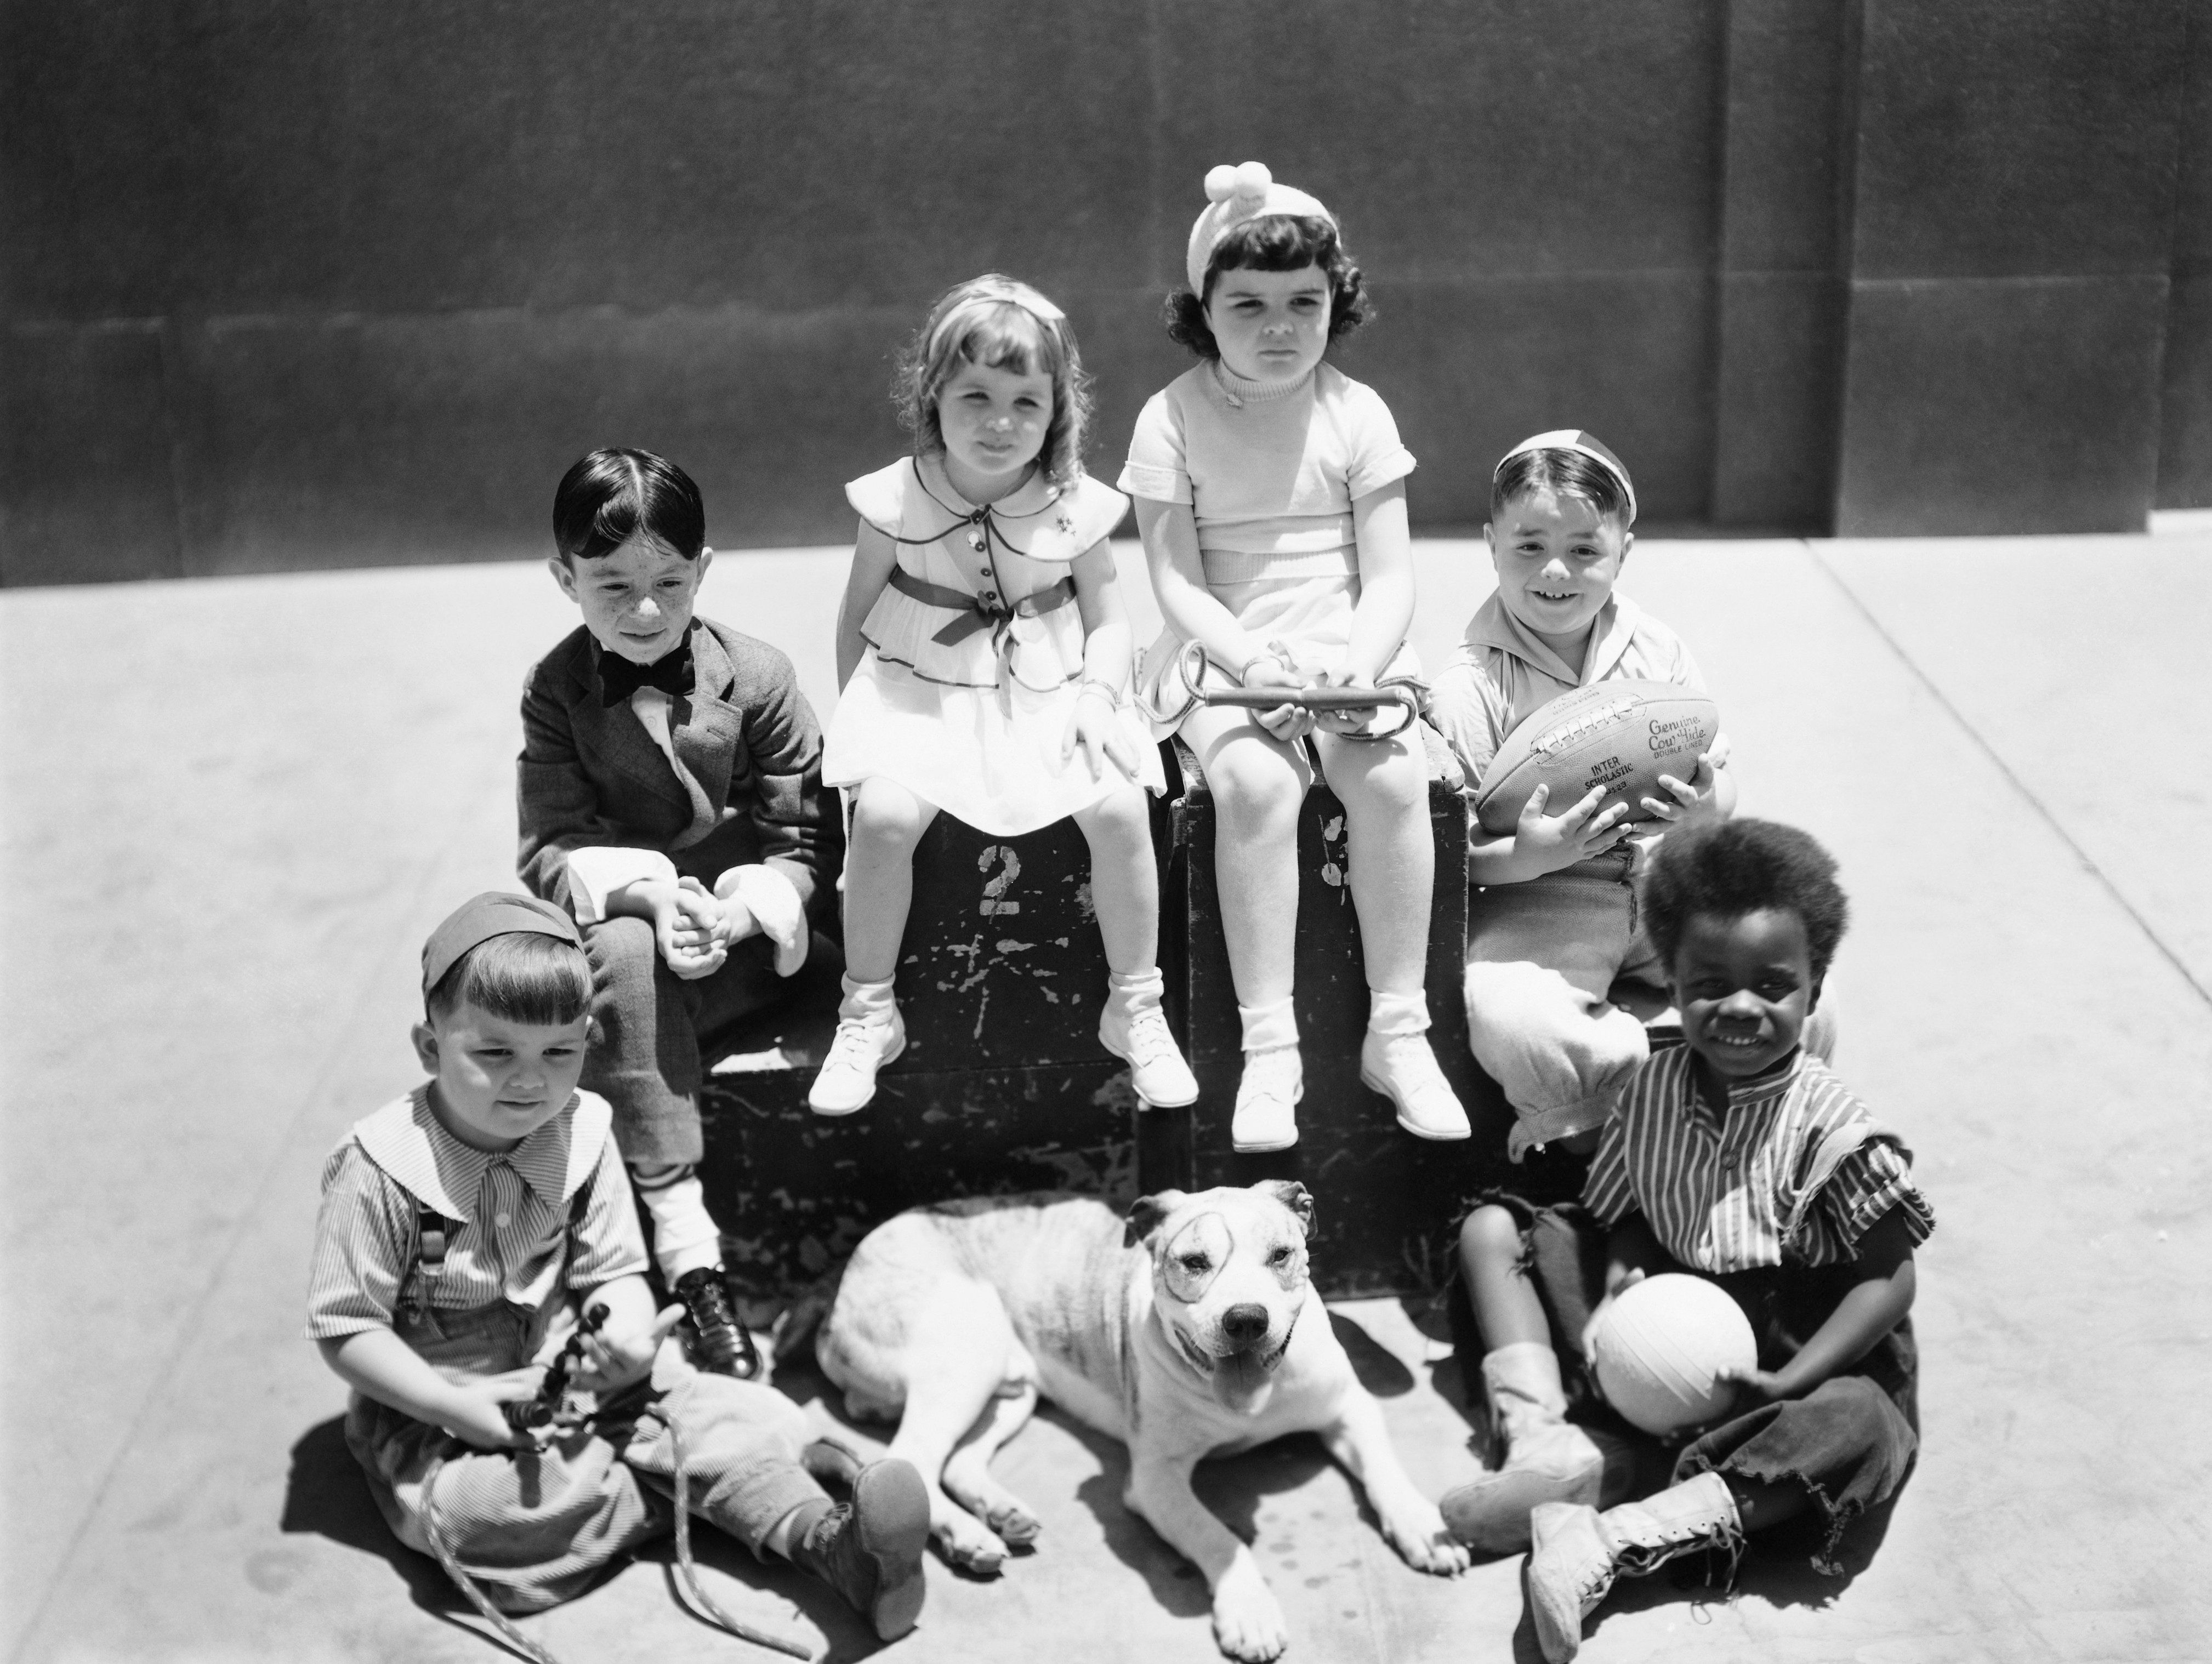 The cast of "Our Gang/Little Rascals" TV show, Hal Roach, MGM production. Spanky McFarland holding the football. Undated photograph. | Source: Getty Images